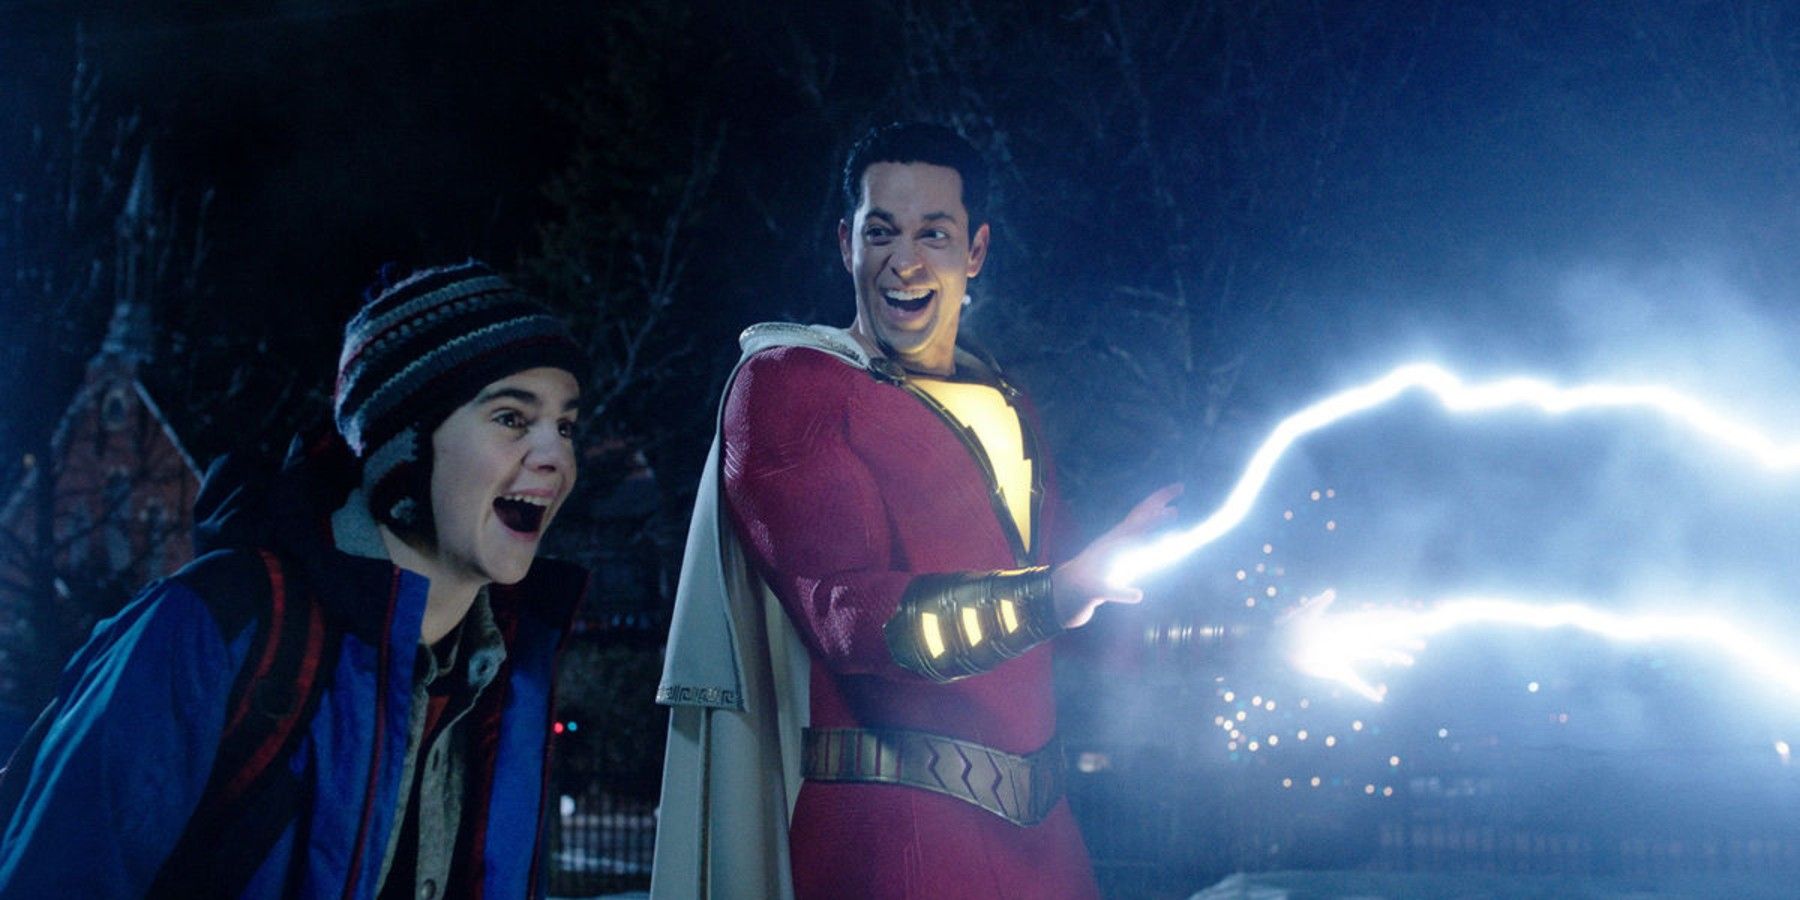 Billy Batson, as Shazam, fires lightning from his hands as he and Freddy Freeman look excited